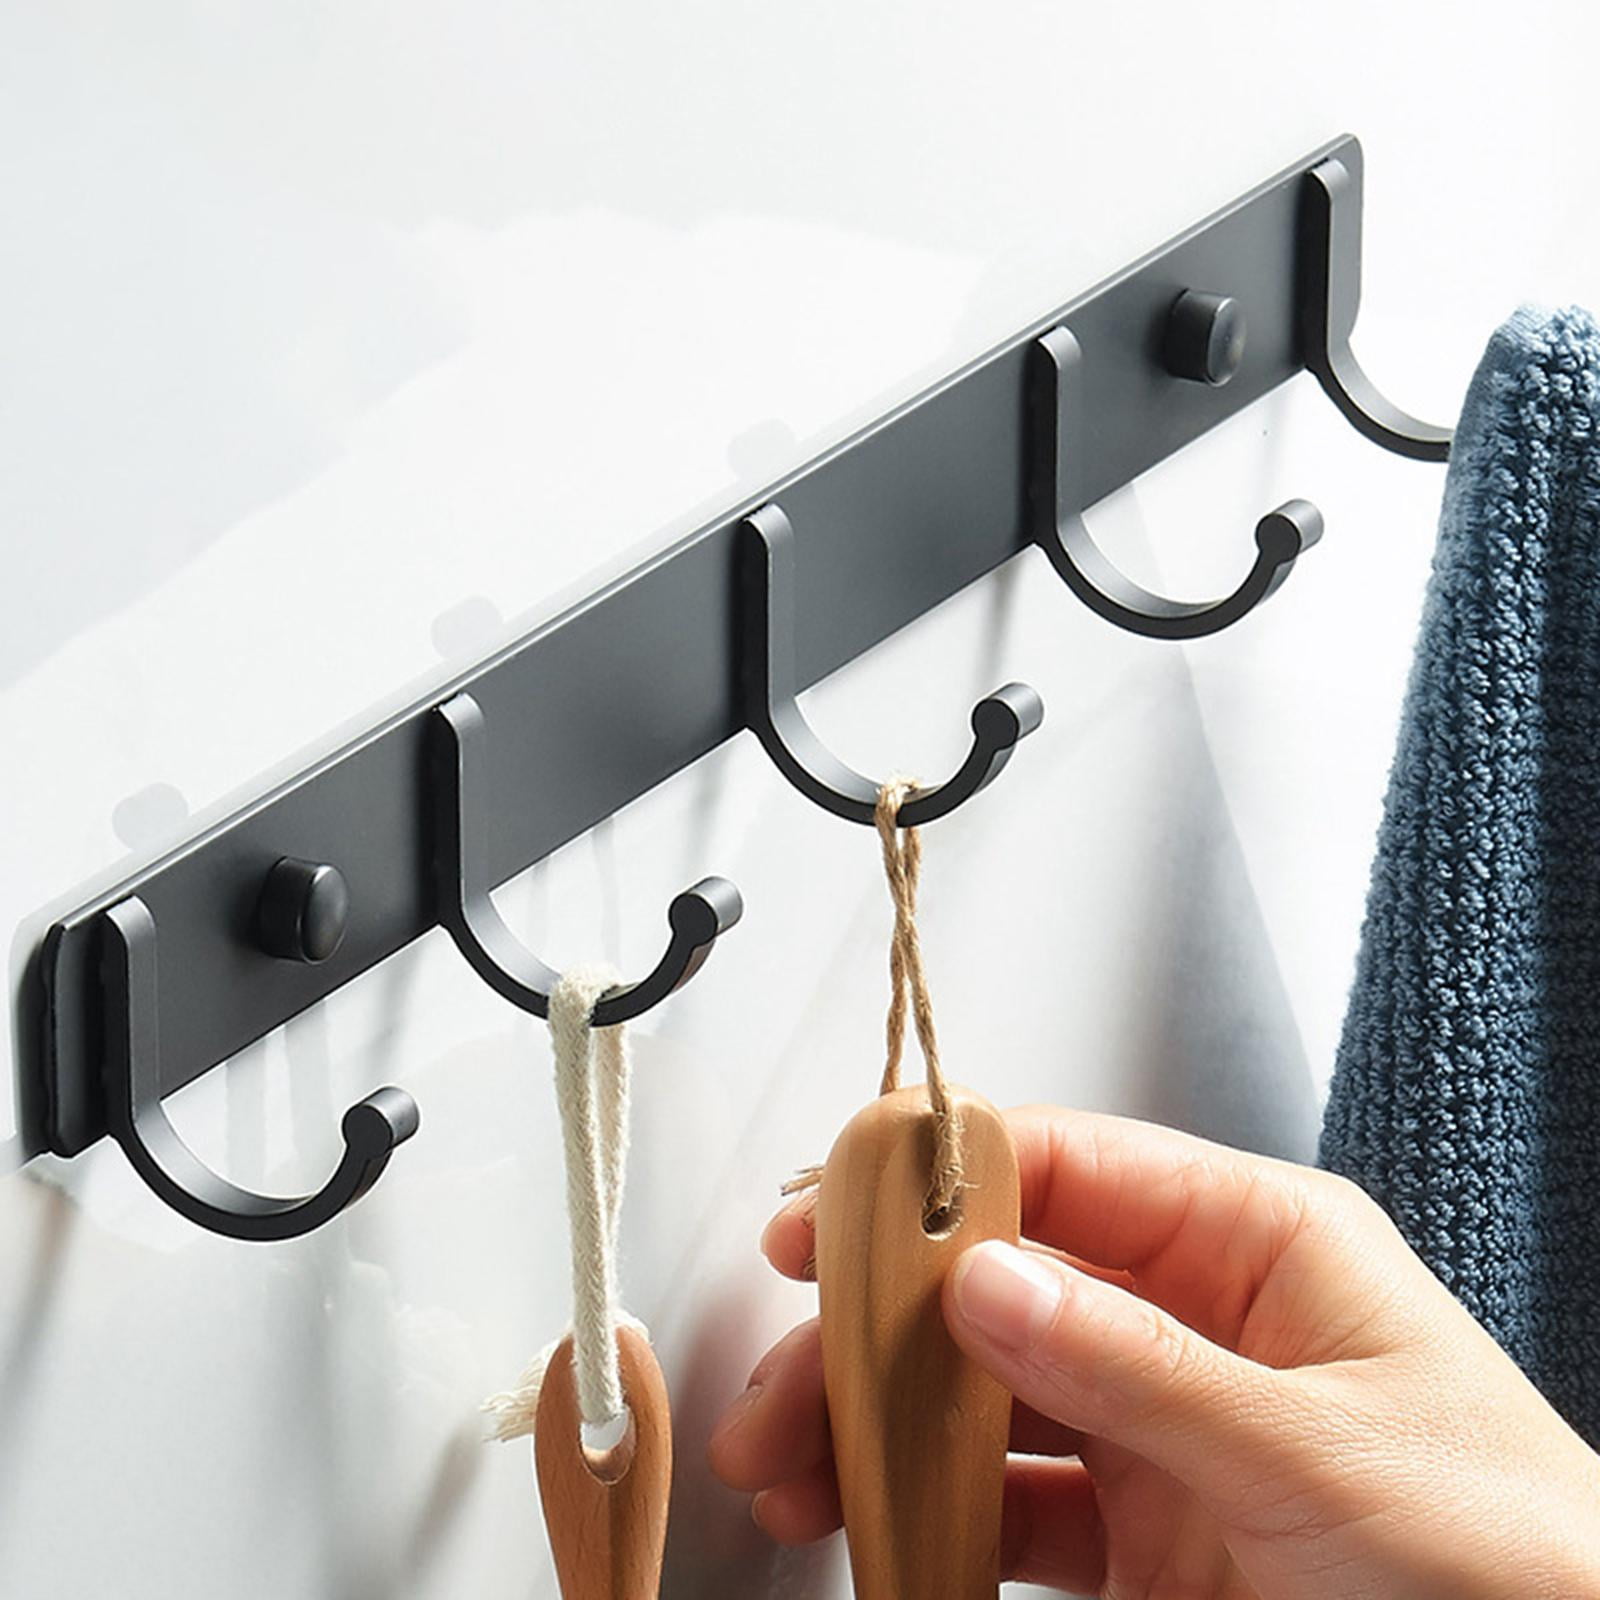 WHITGO Coat Hooks Wall Mounted, 5 Hooks Wooden Coat Hook Rail for Coat Hat  Towel Robe Hat Clothes Purse Robes Kitchen Bathroom Entryway (Dark Brown, 1  Pack) : Amazon.co.uk: Home & Kitchen